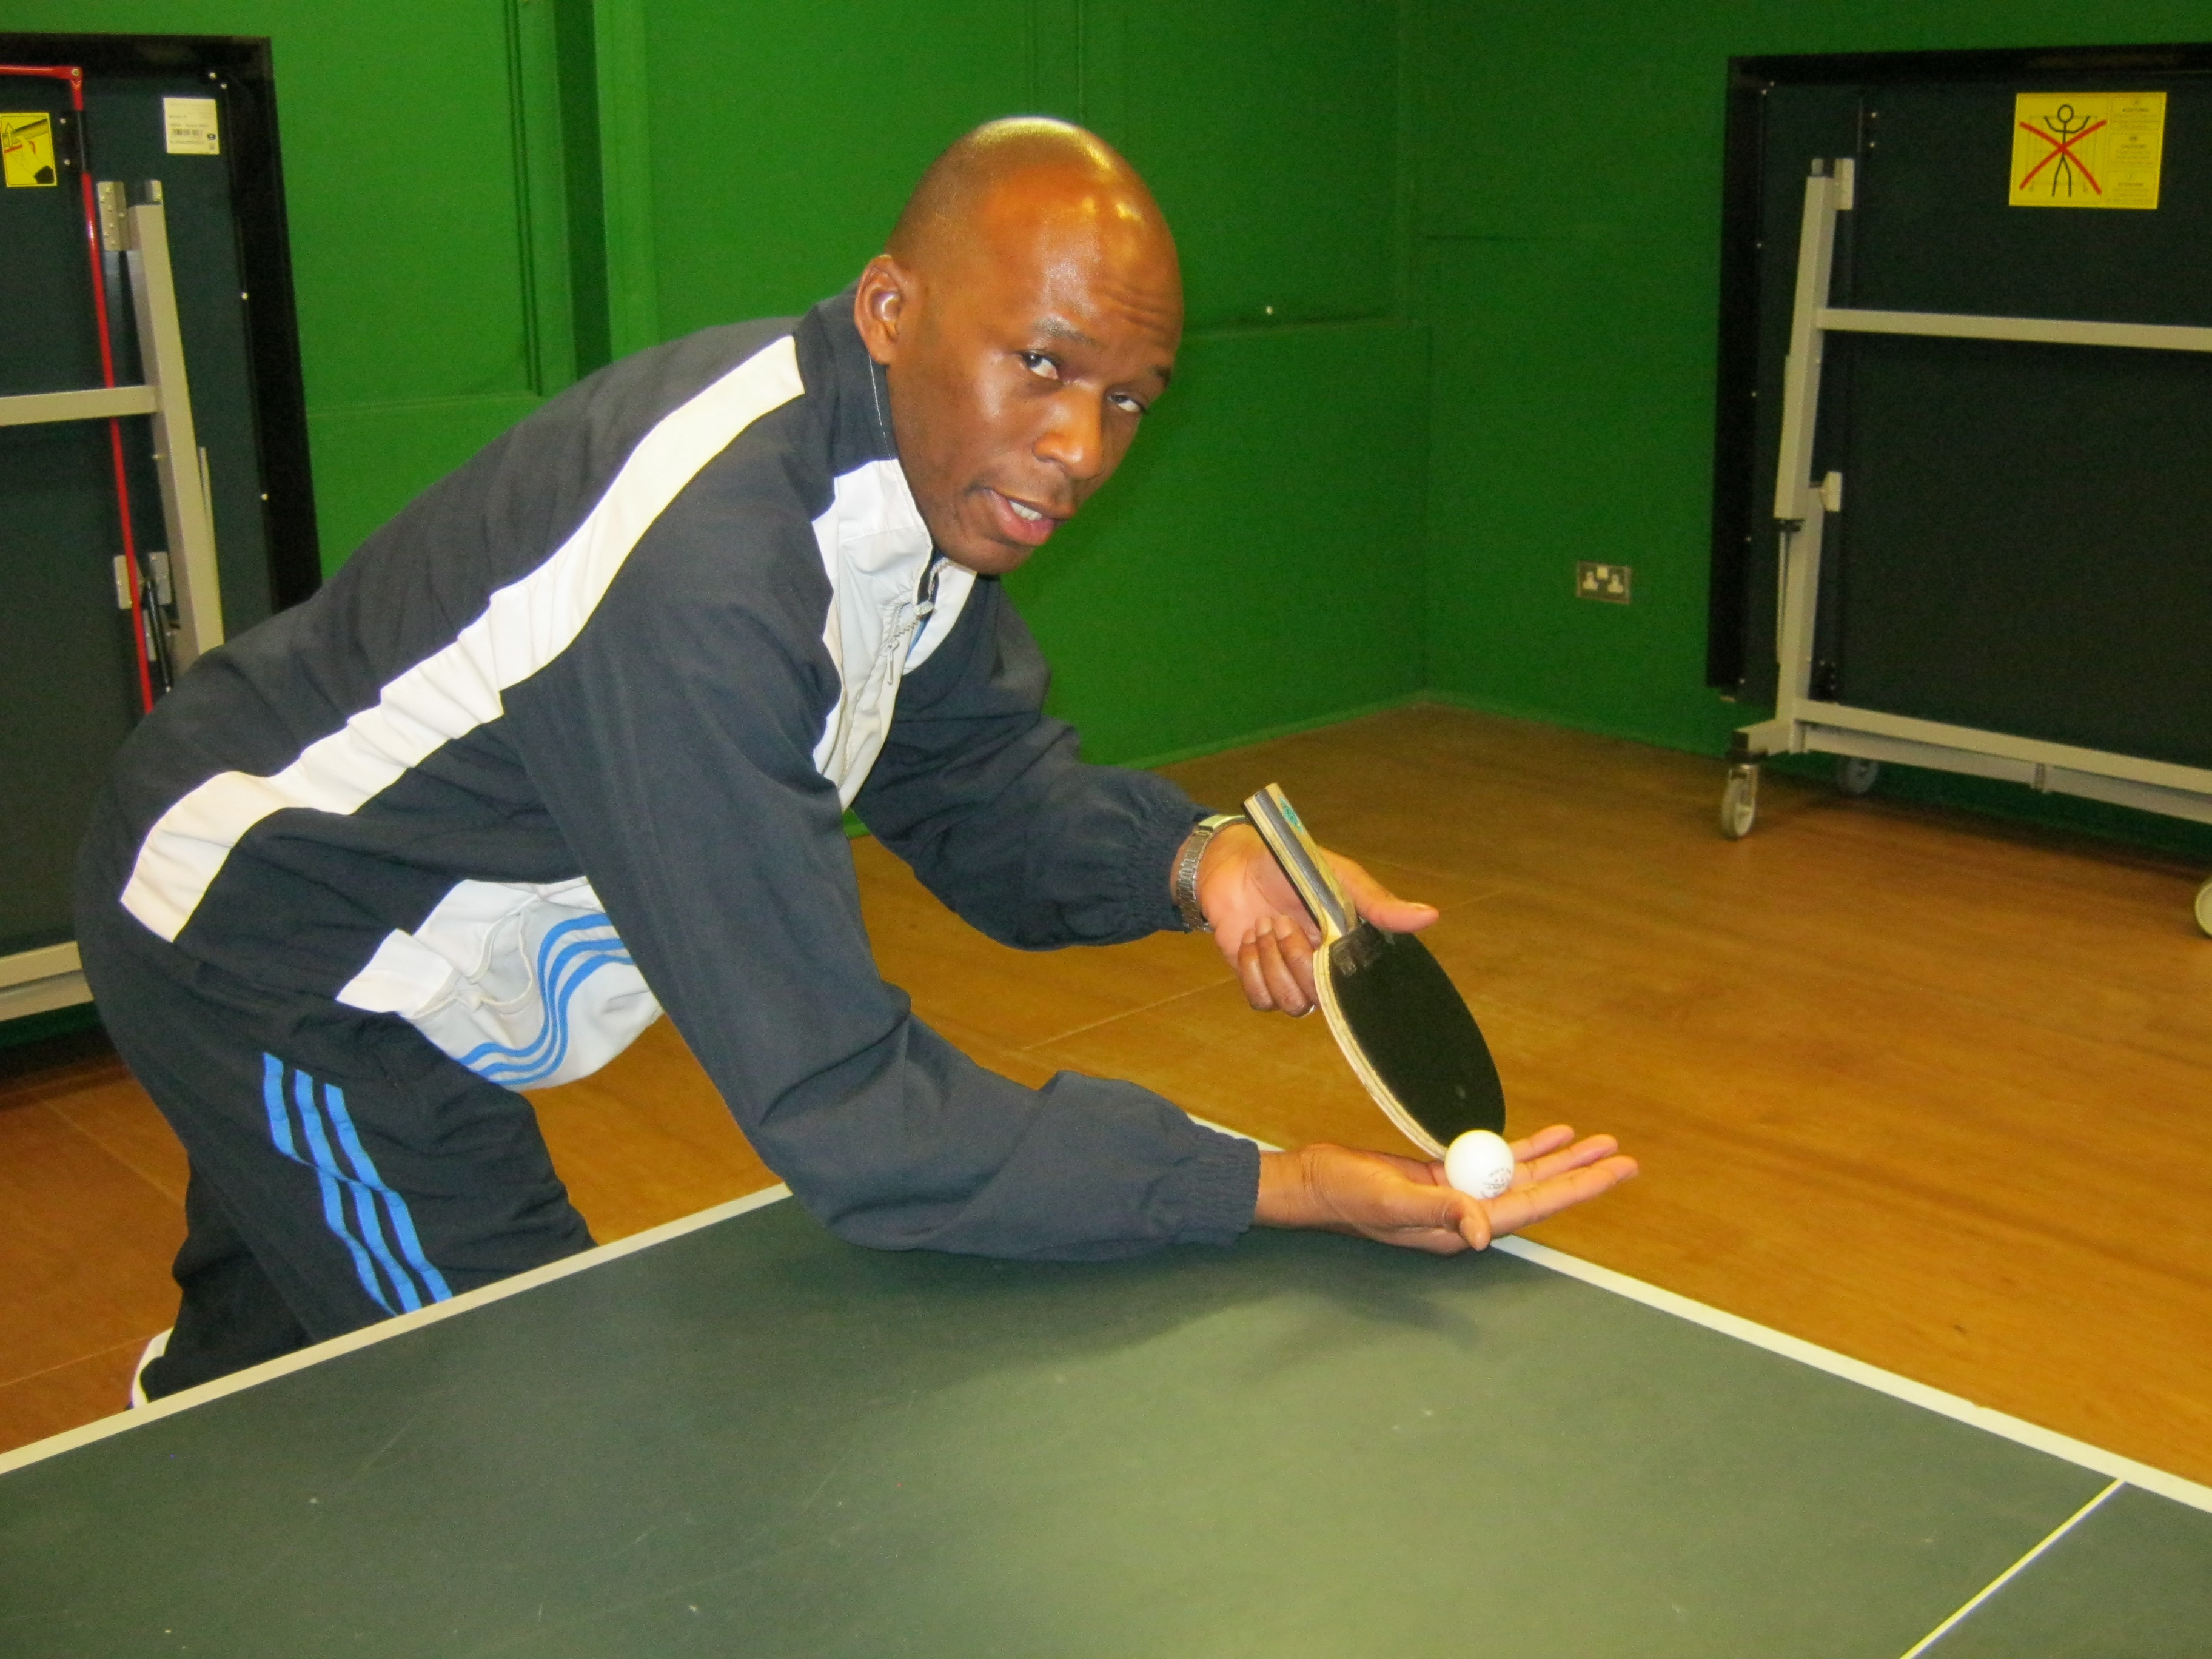 David Olawale Actor, promoting Table Tennis at a club in London, UK